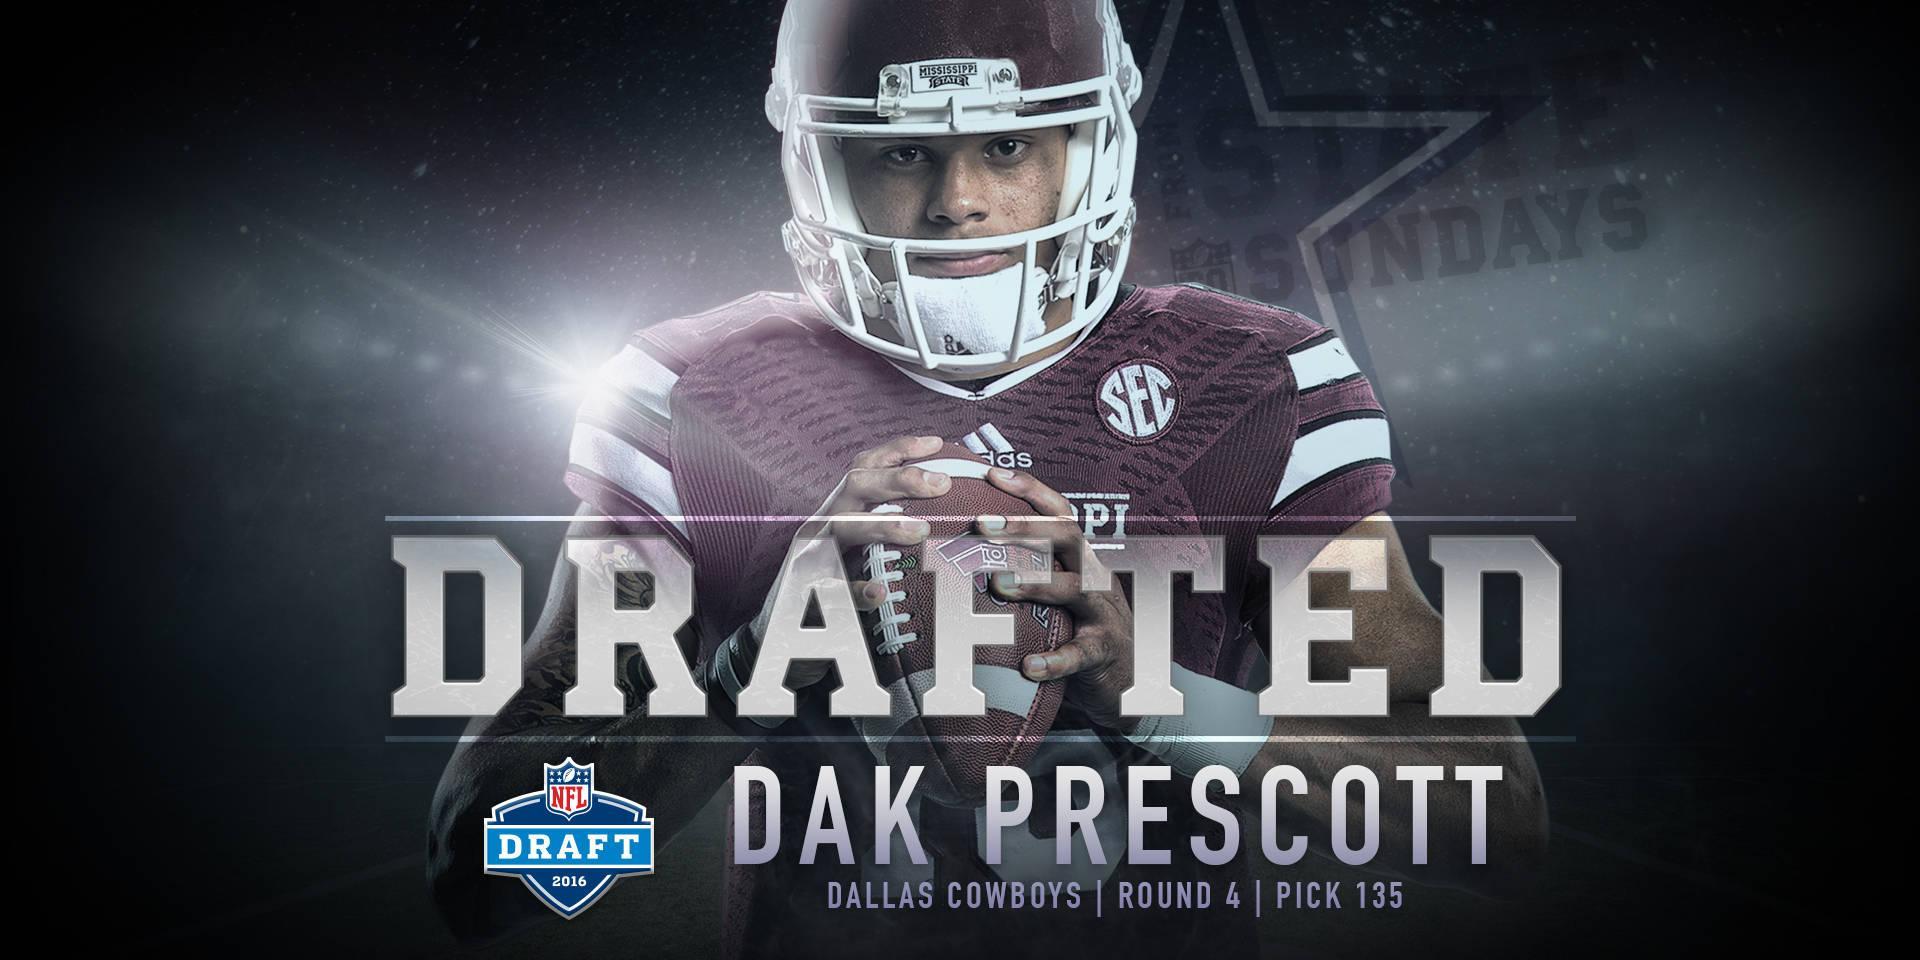 Dak Prescott Selected By Dallas Cowboys in Round 4 of NFL Draft